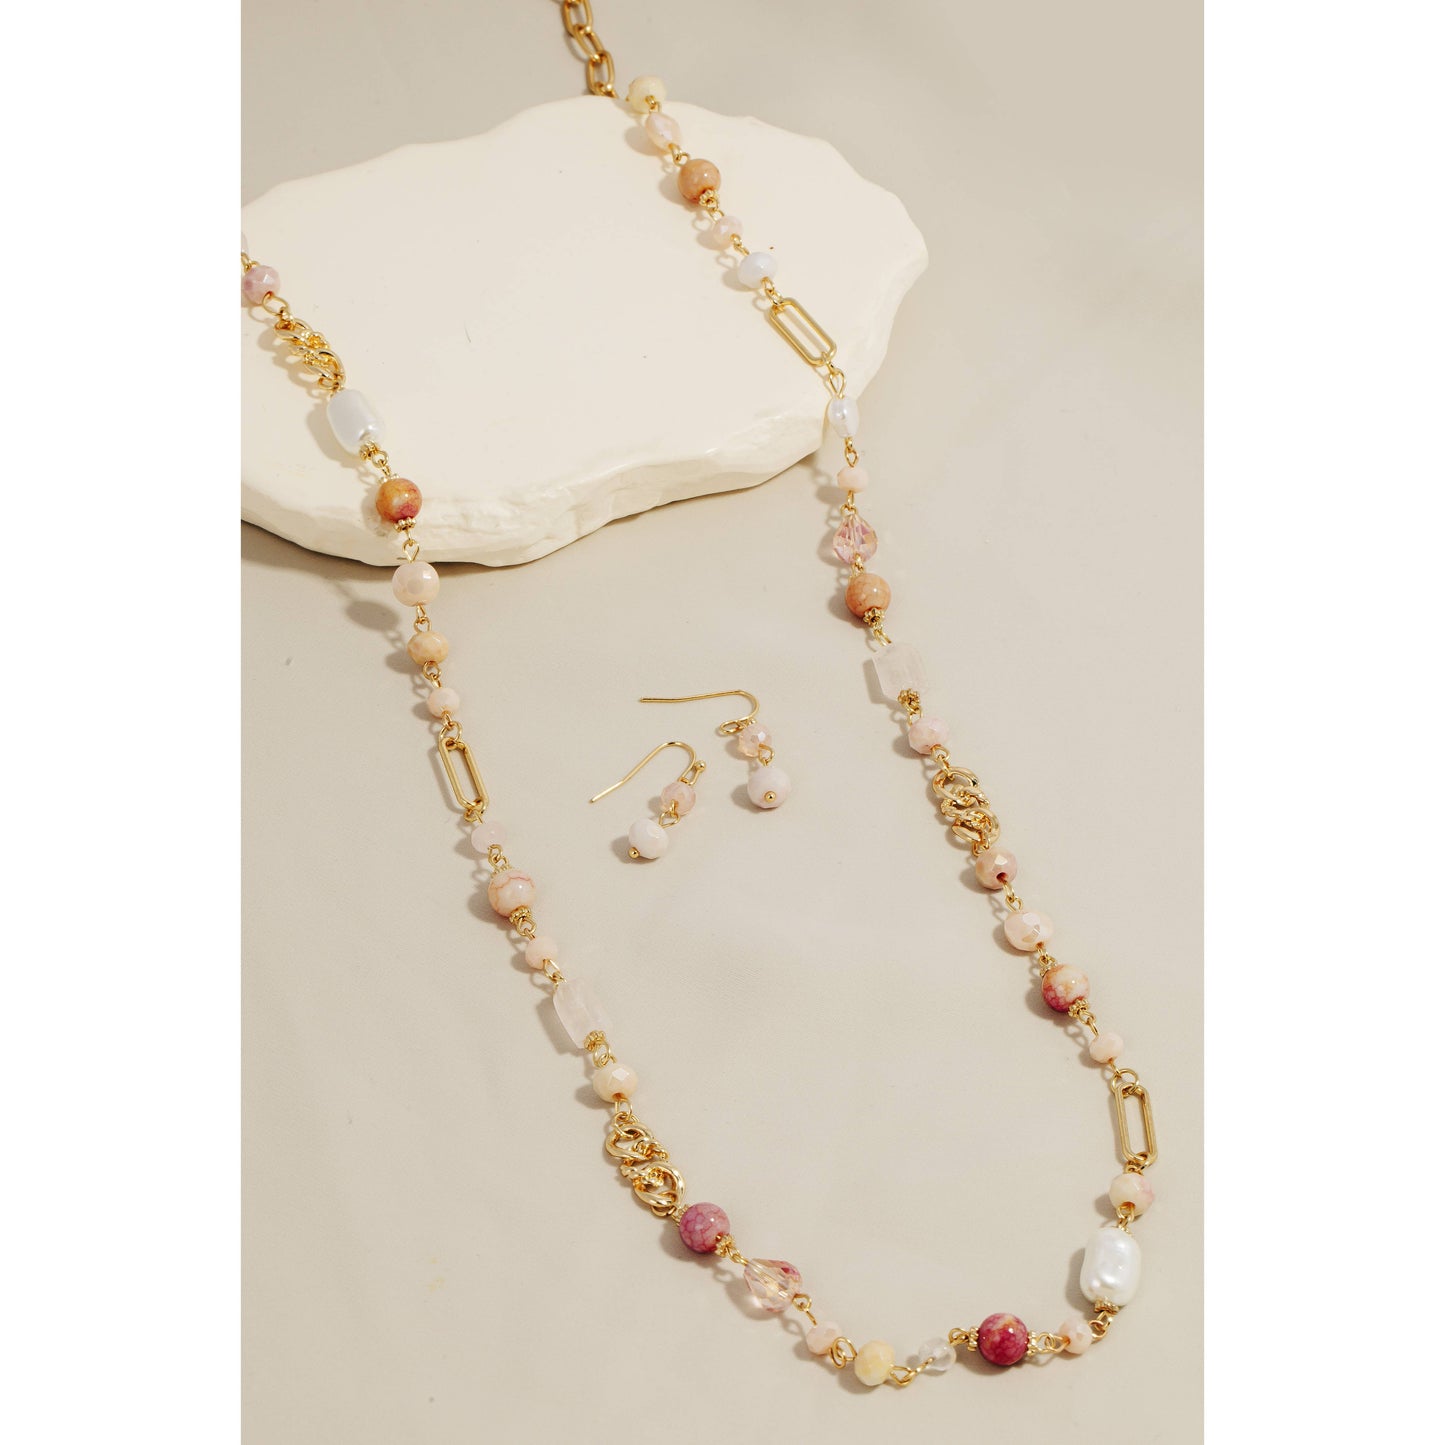 Mixed Beaded Long Chain Necklace Set